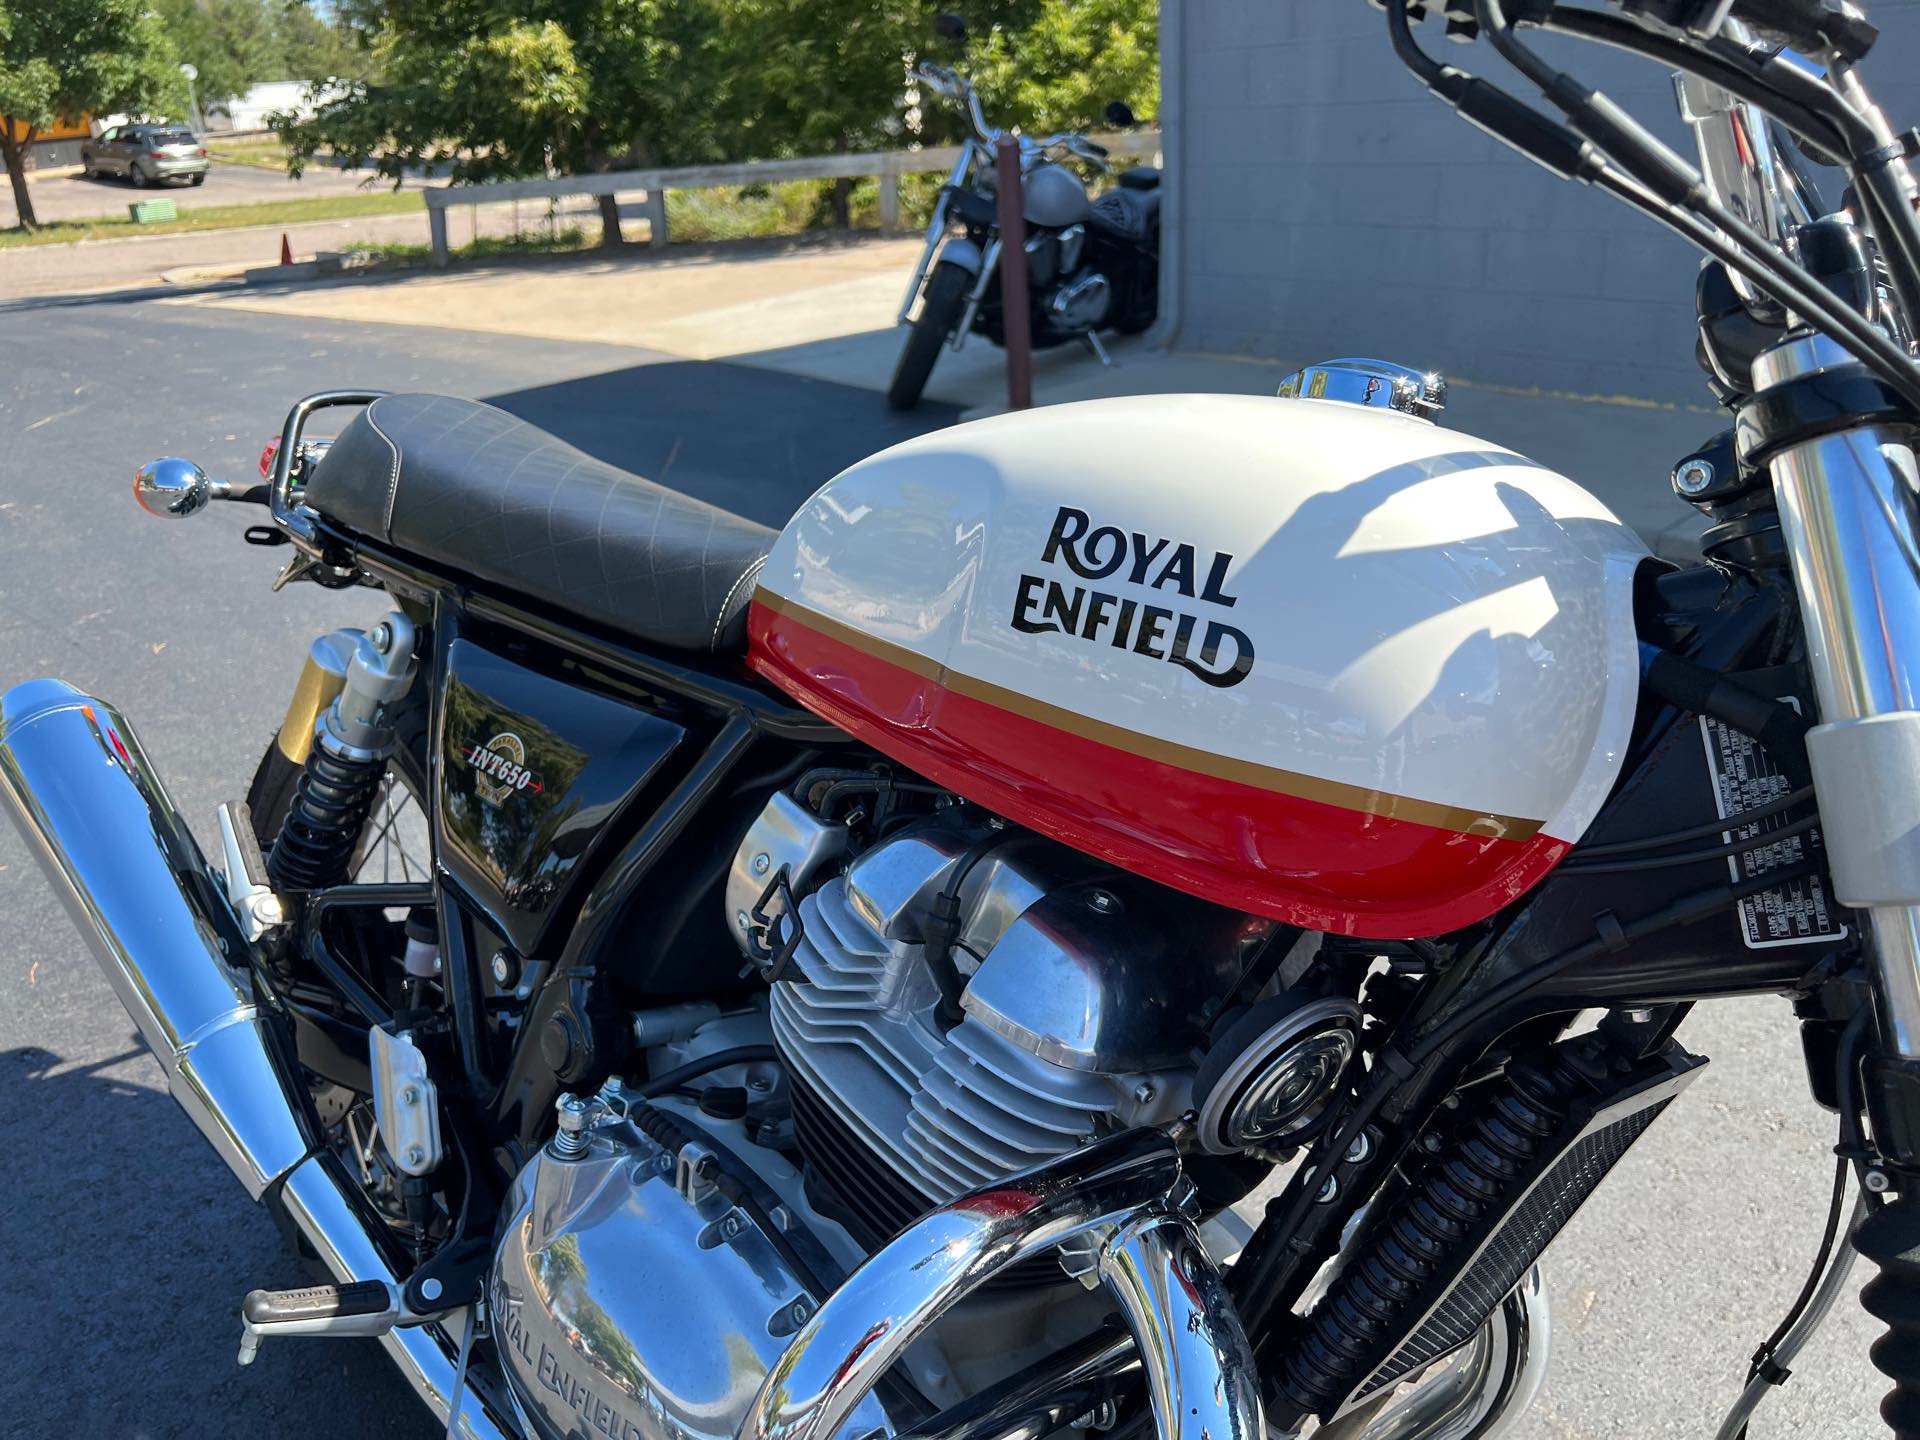 2022 Royal Enfield Twins INT650 at Aces Motorcycles - Fort Collins